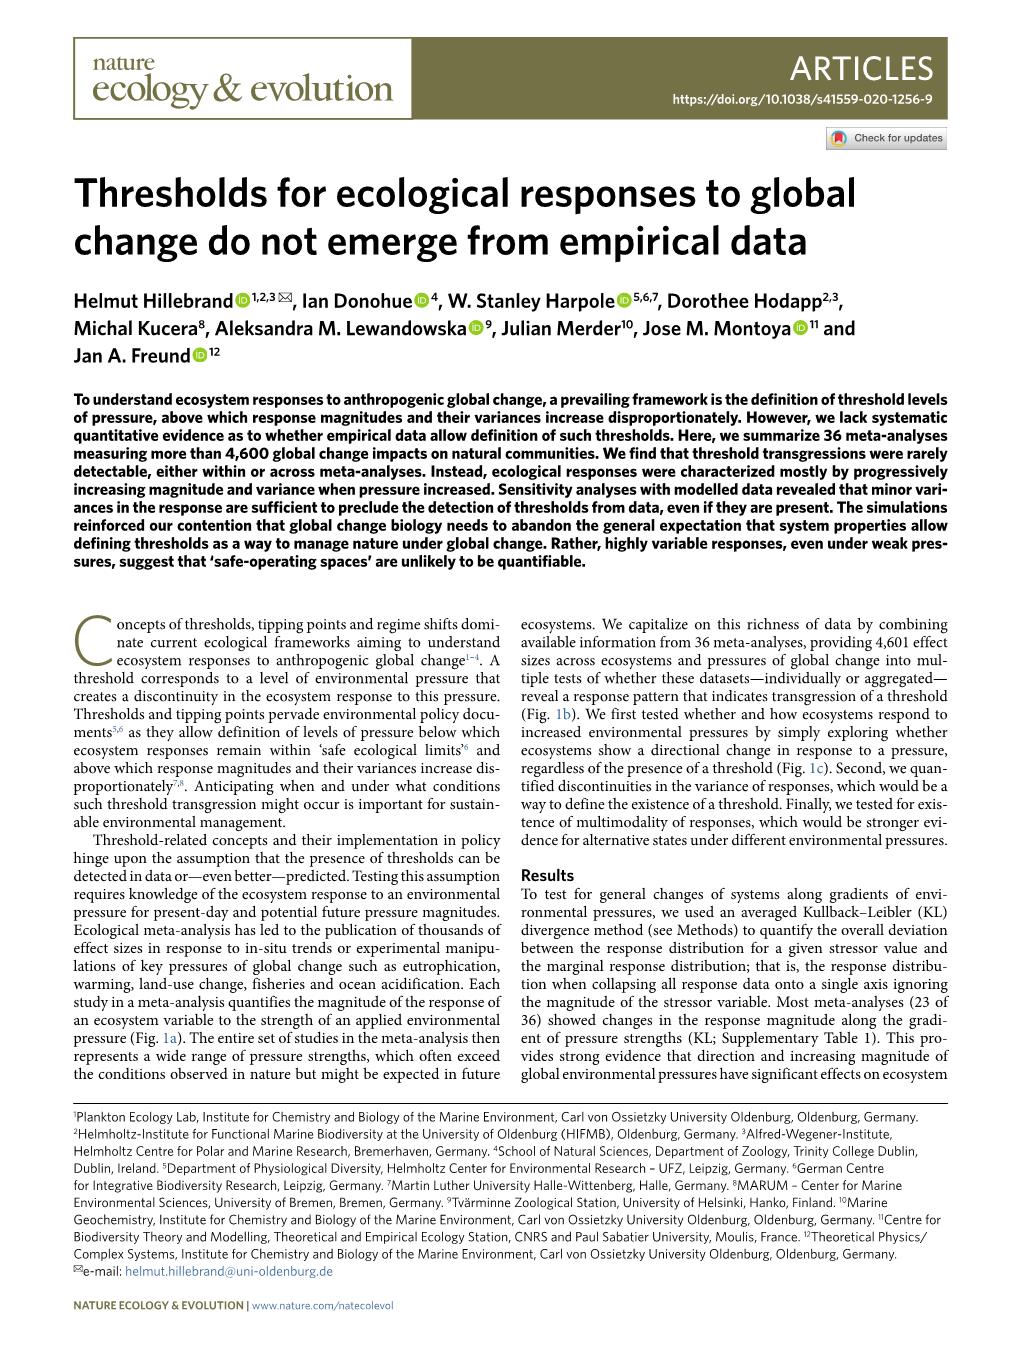 Thresholds for Ecological Responses to Global Change Do Not Emerge from Empirical Data